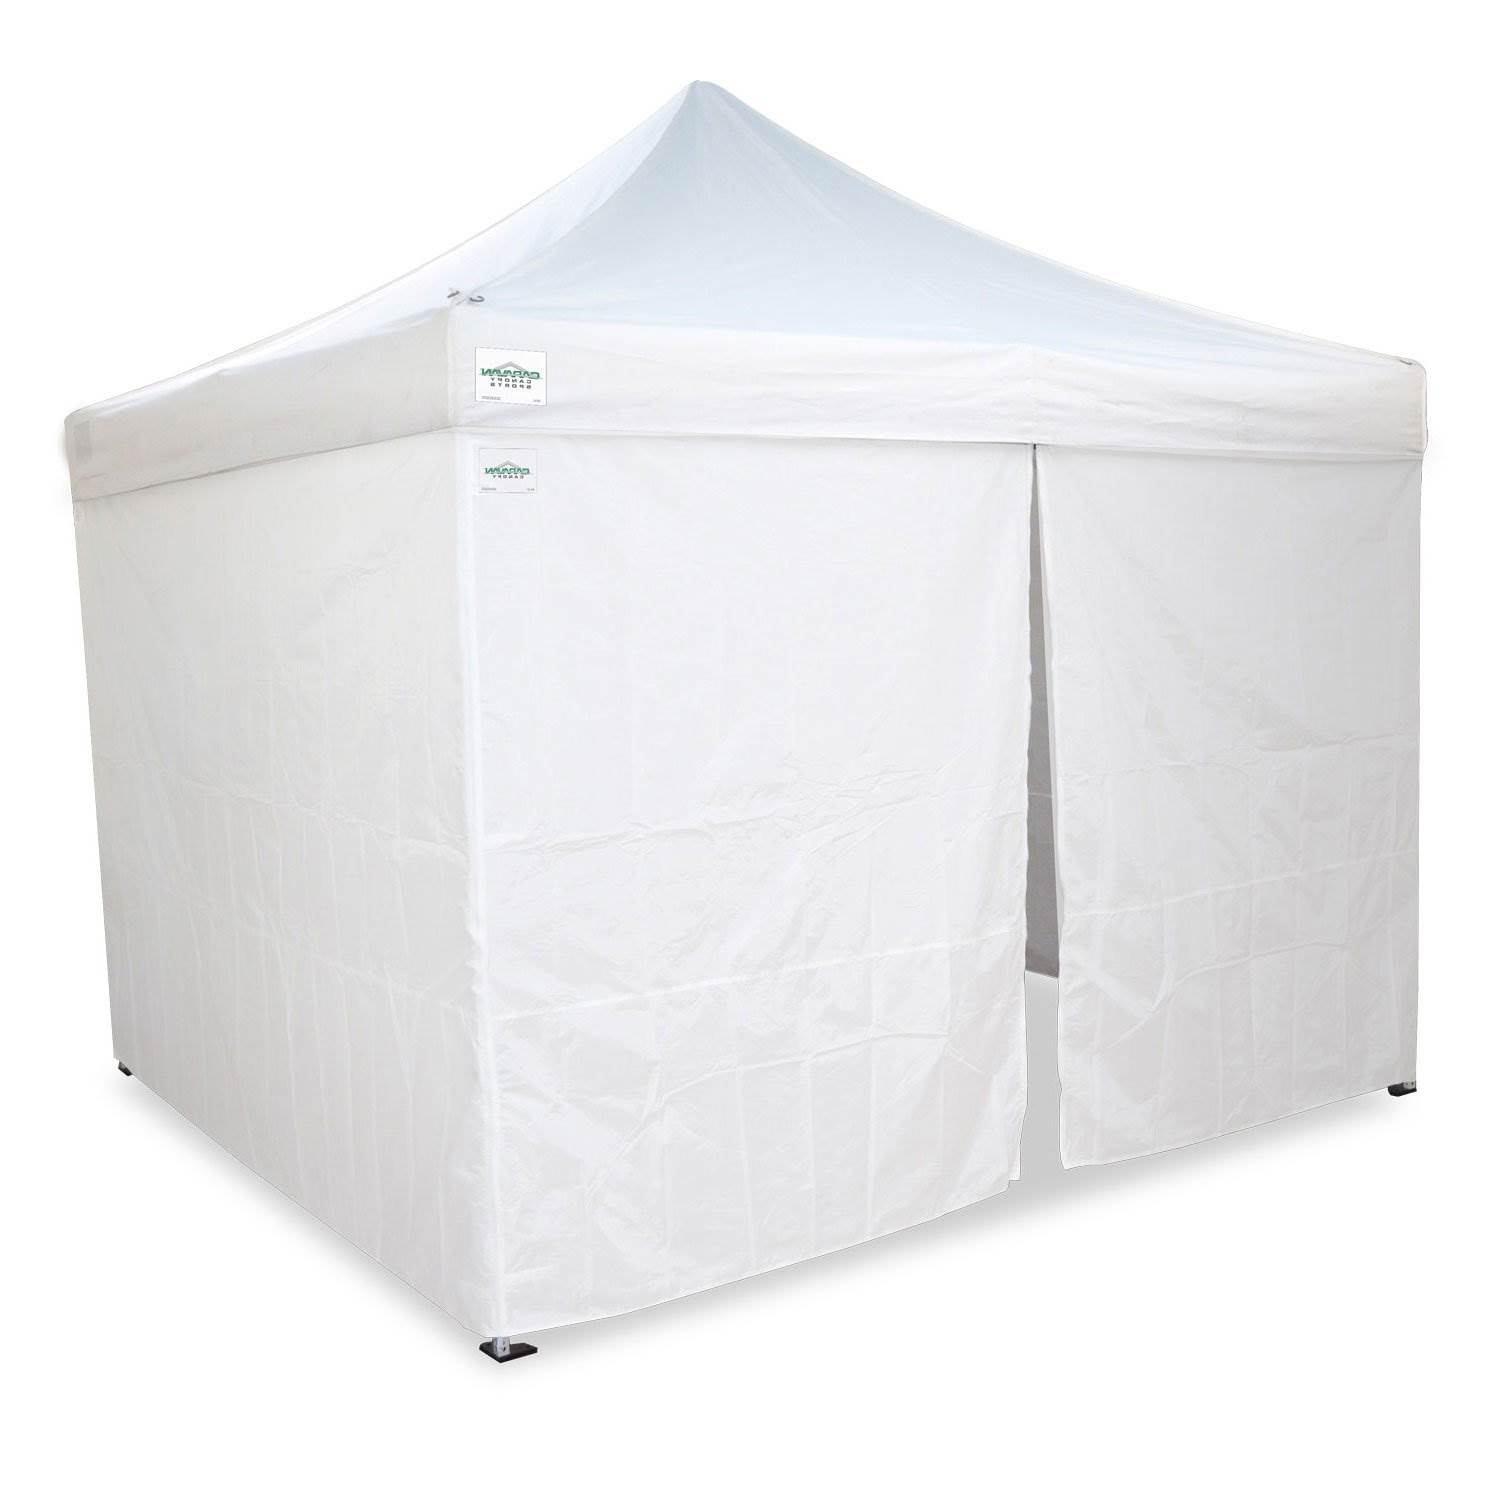 Caravan Canopy CVAN11007912014 4 Sidewall Kit Only, for Outdoor Tent, White - image 1 of 5